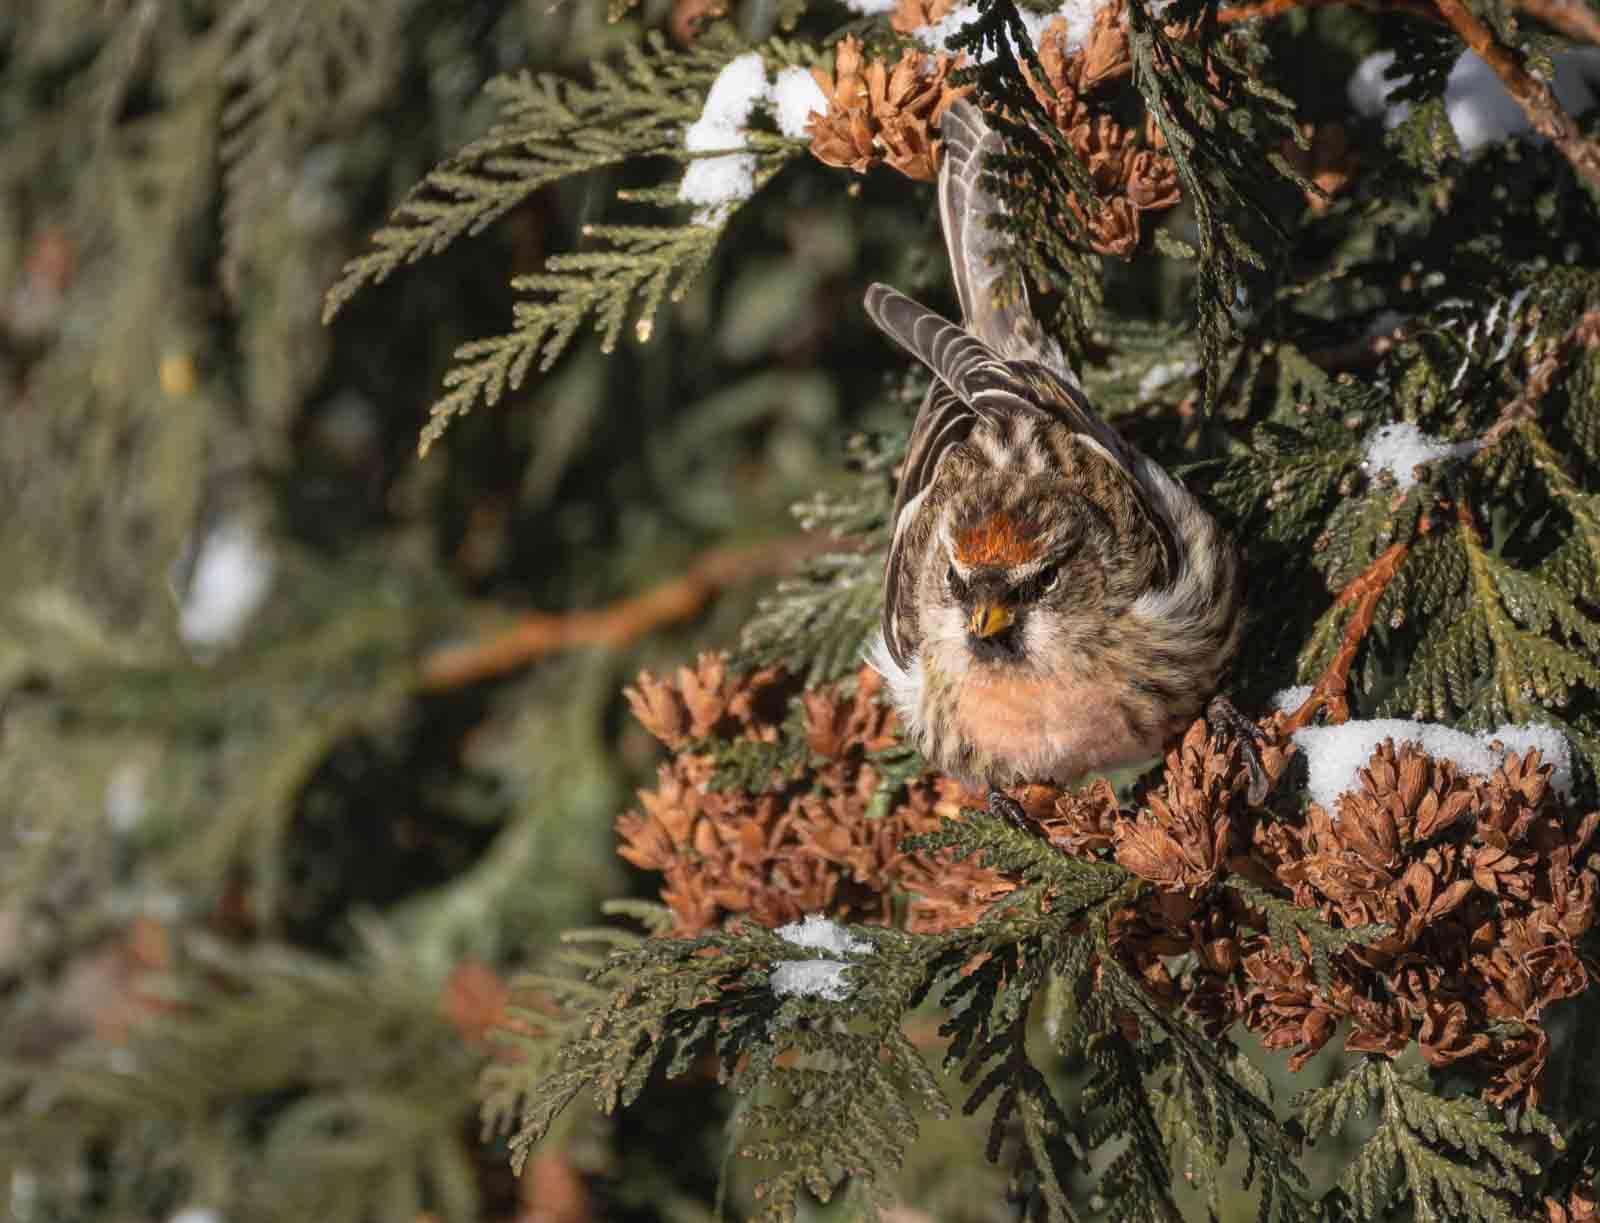 A redpoll is seen foraging in a tree outside of Youngchild Hall.